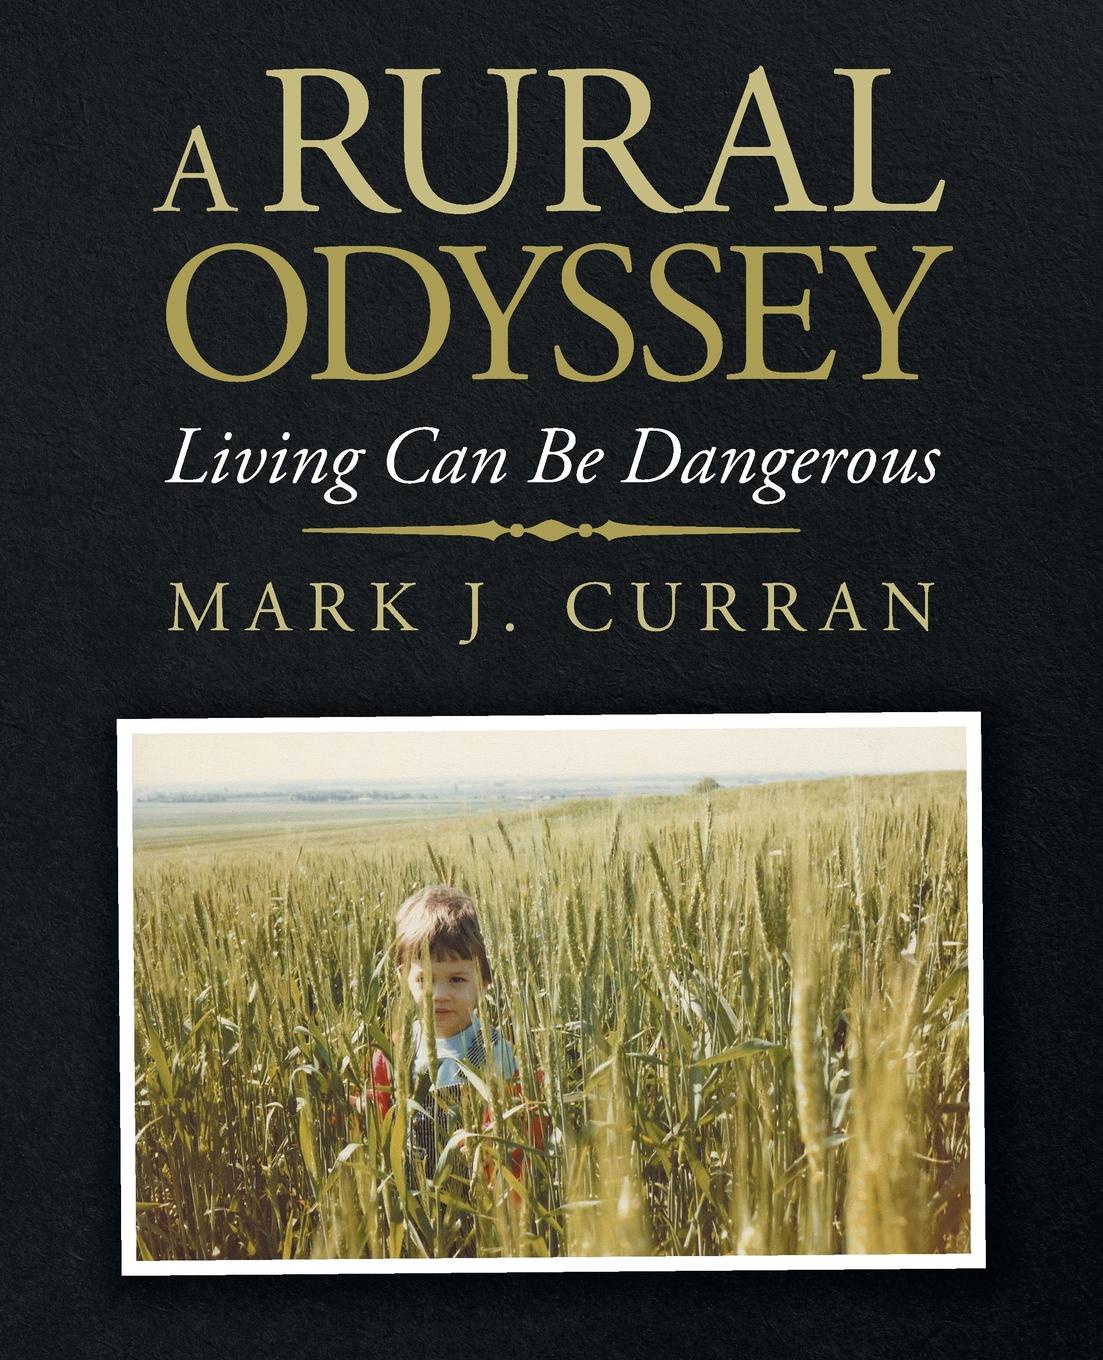 A Rural Odyssey. Living Can Be Dangerous